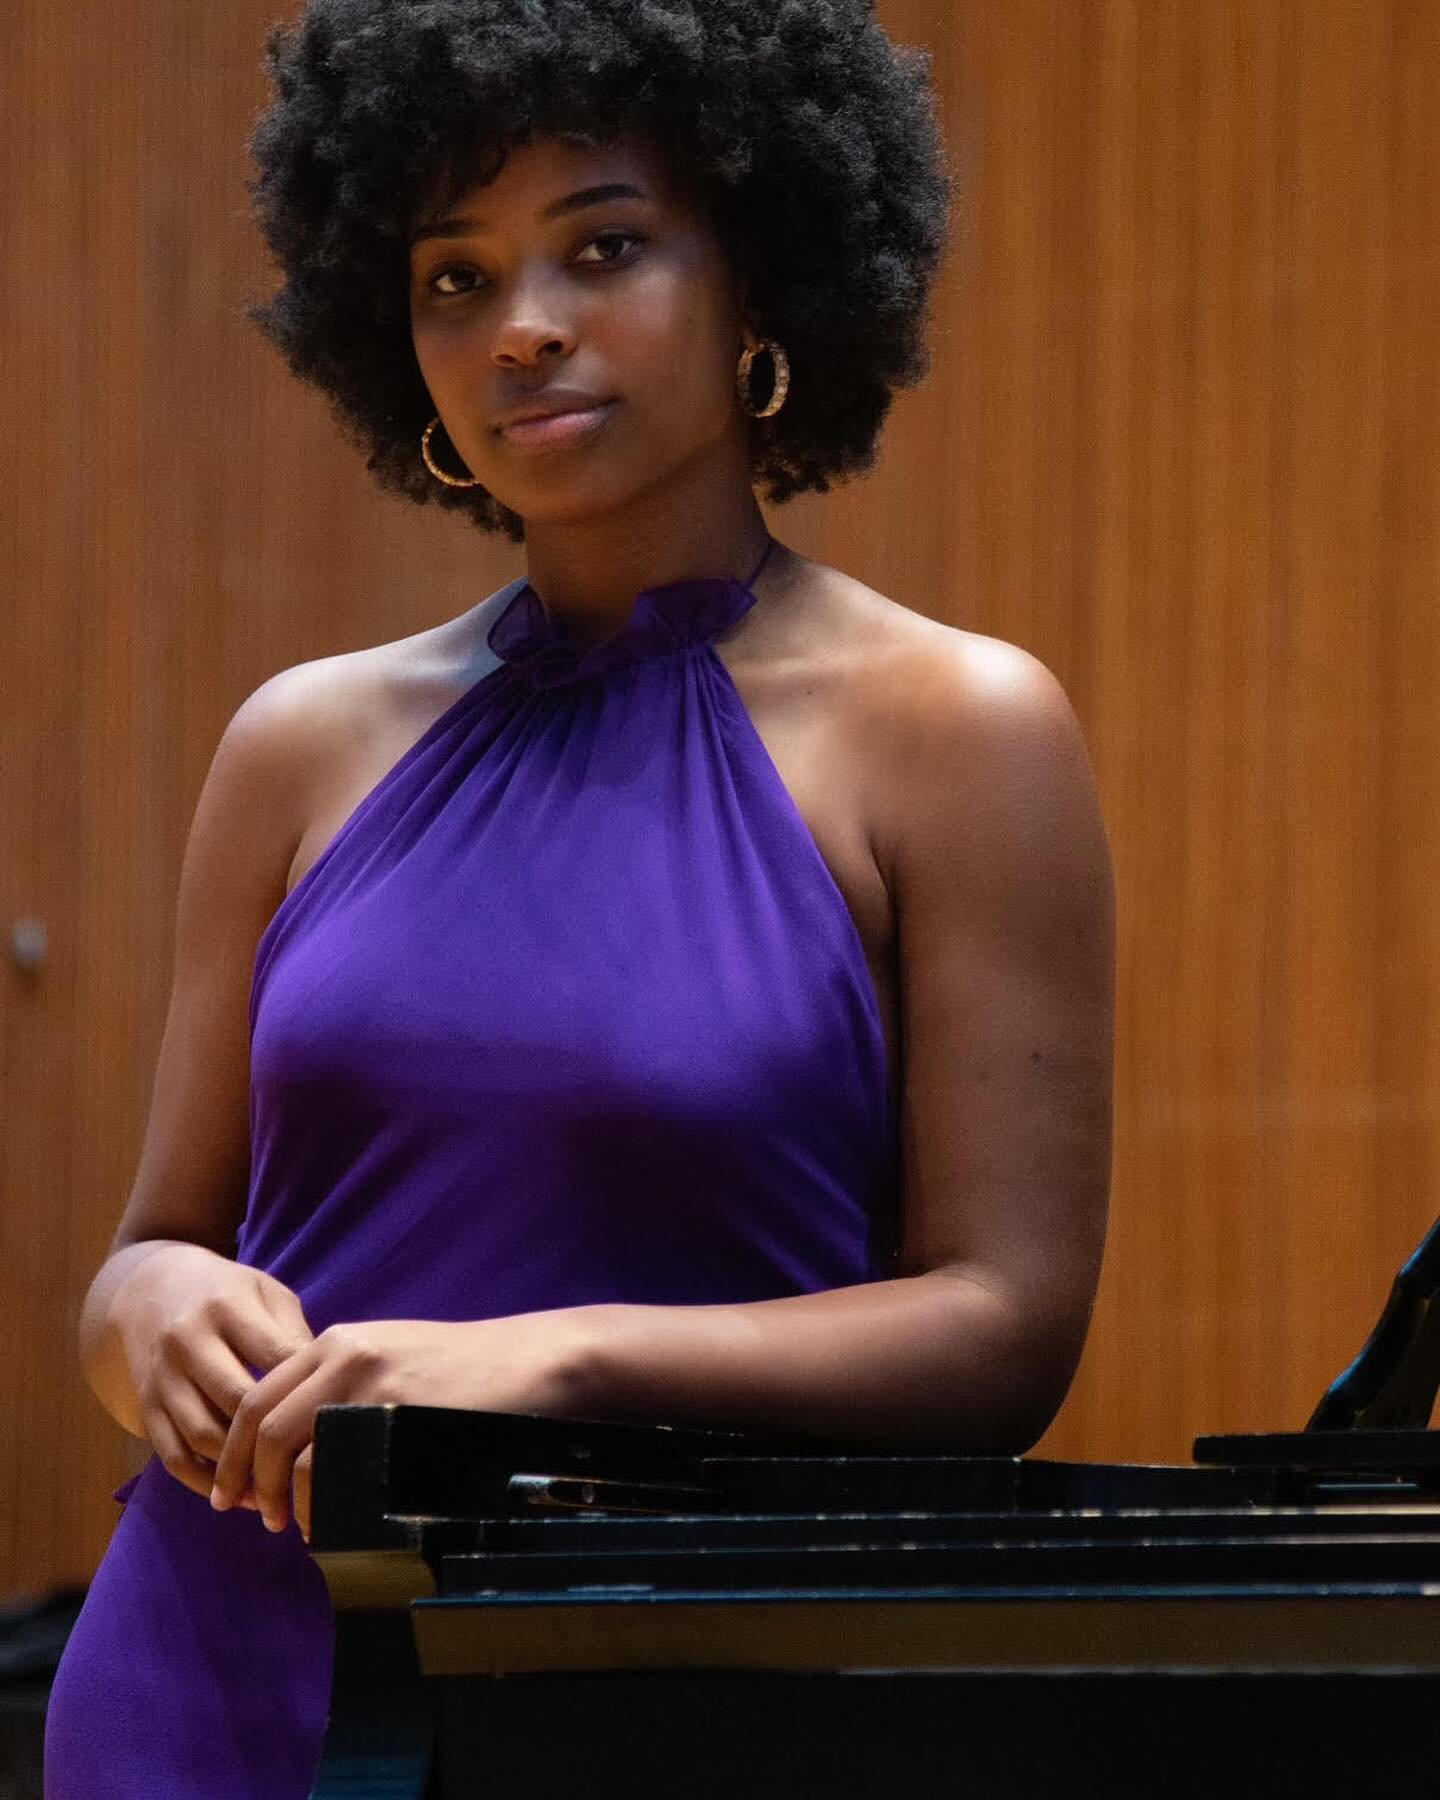 We hope you can come out this weekend and hear pianist Jas Ogiste perform solo works by Brahms, Florence Price, Tania Le&oacute;n, Haydn, Francis Poulenc, Margaret Bonds, and Bach. The NY Times noted that &ldquo;Jas Ogiste performs tender, yearning s